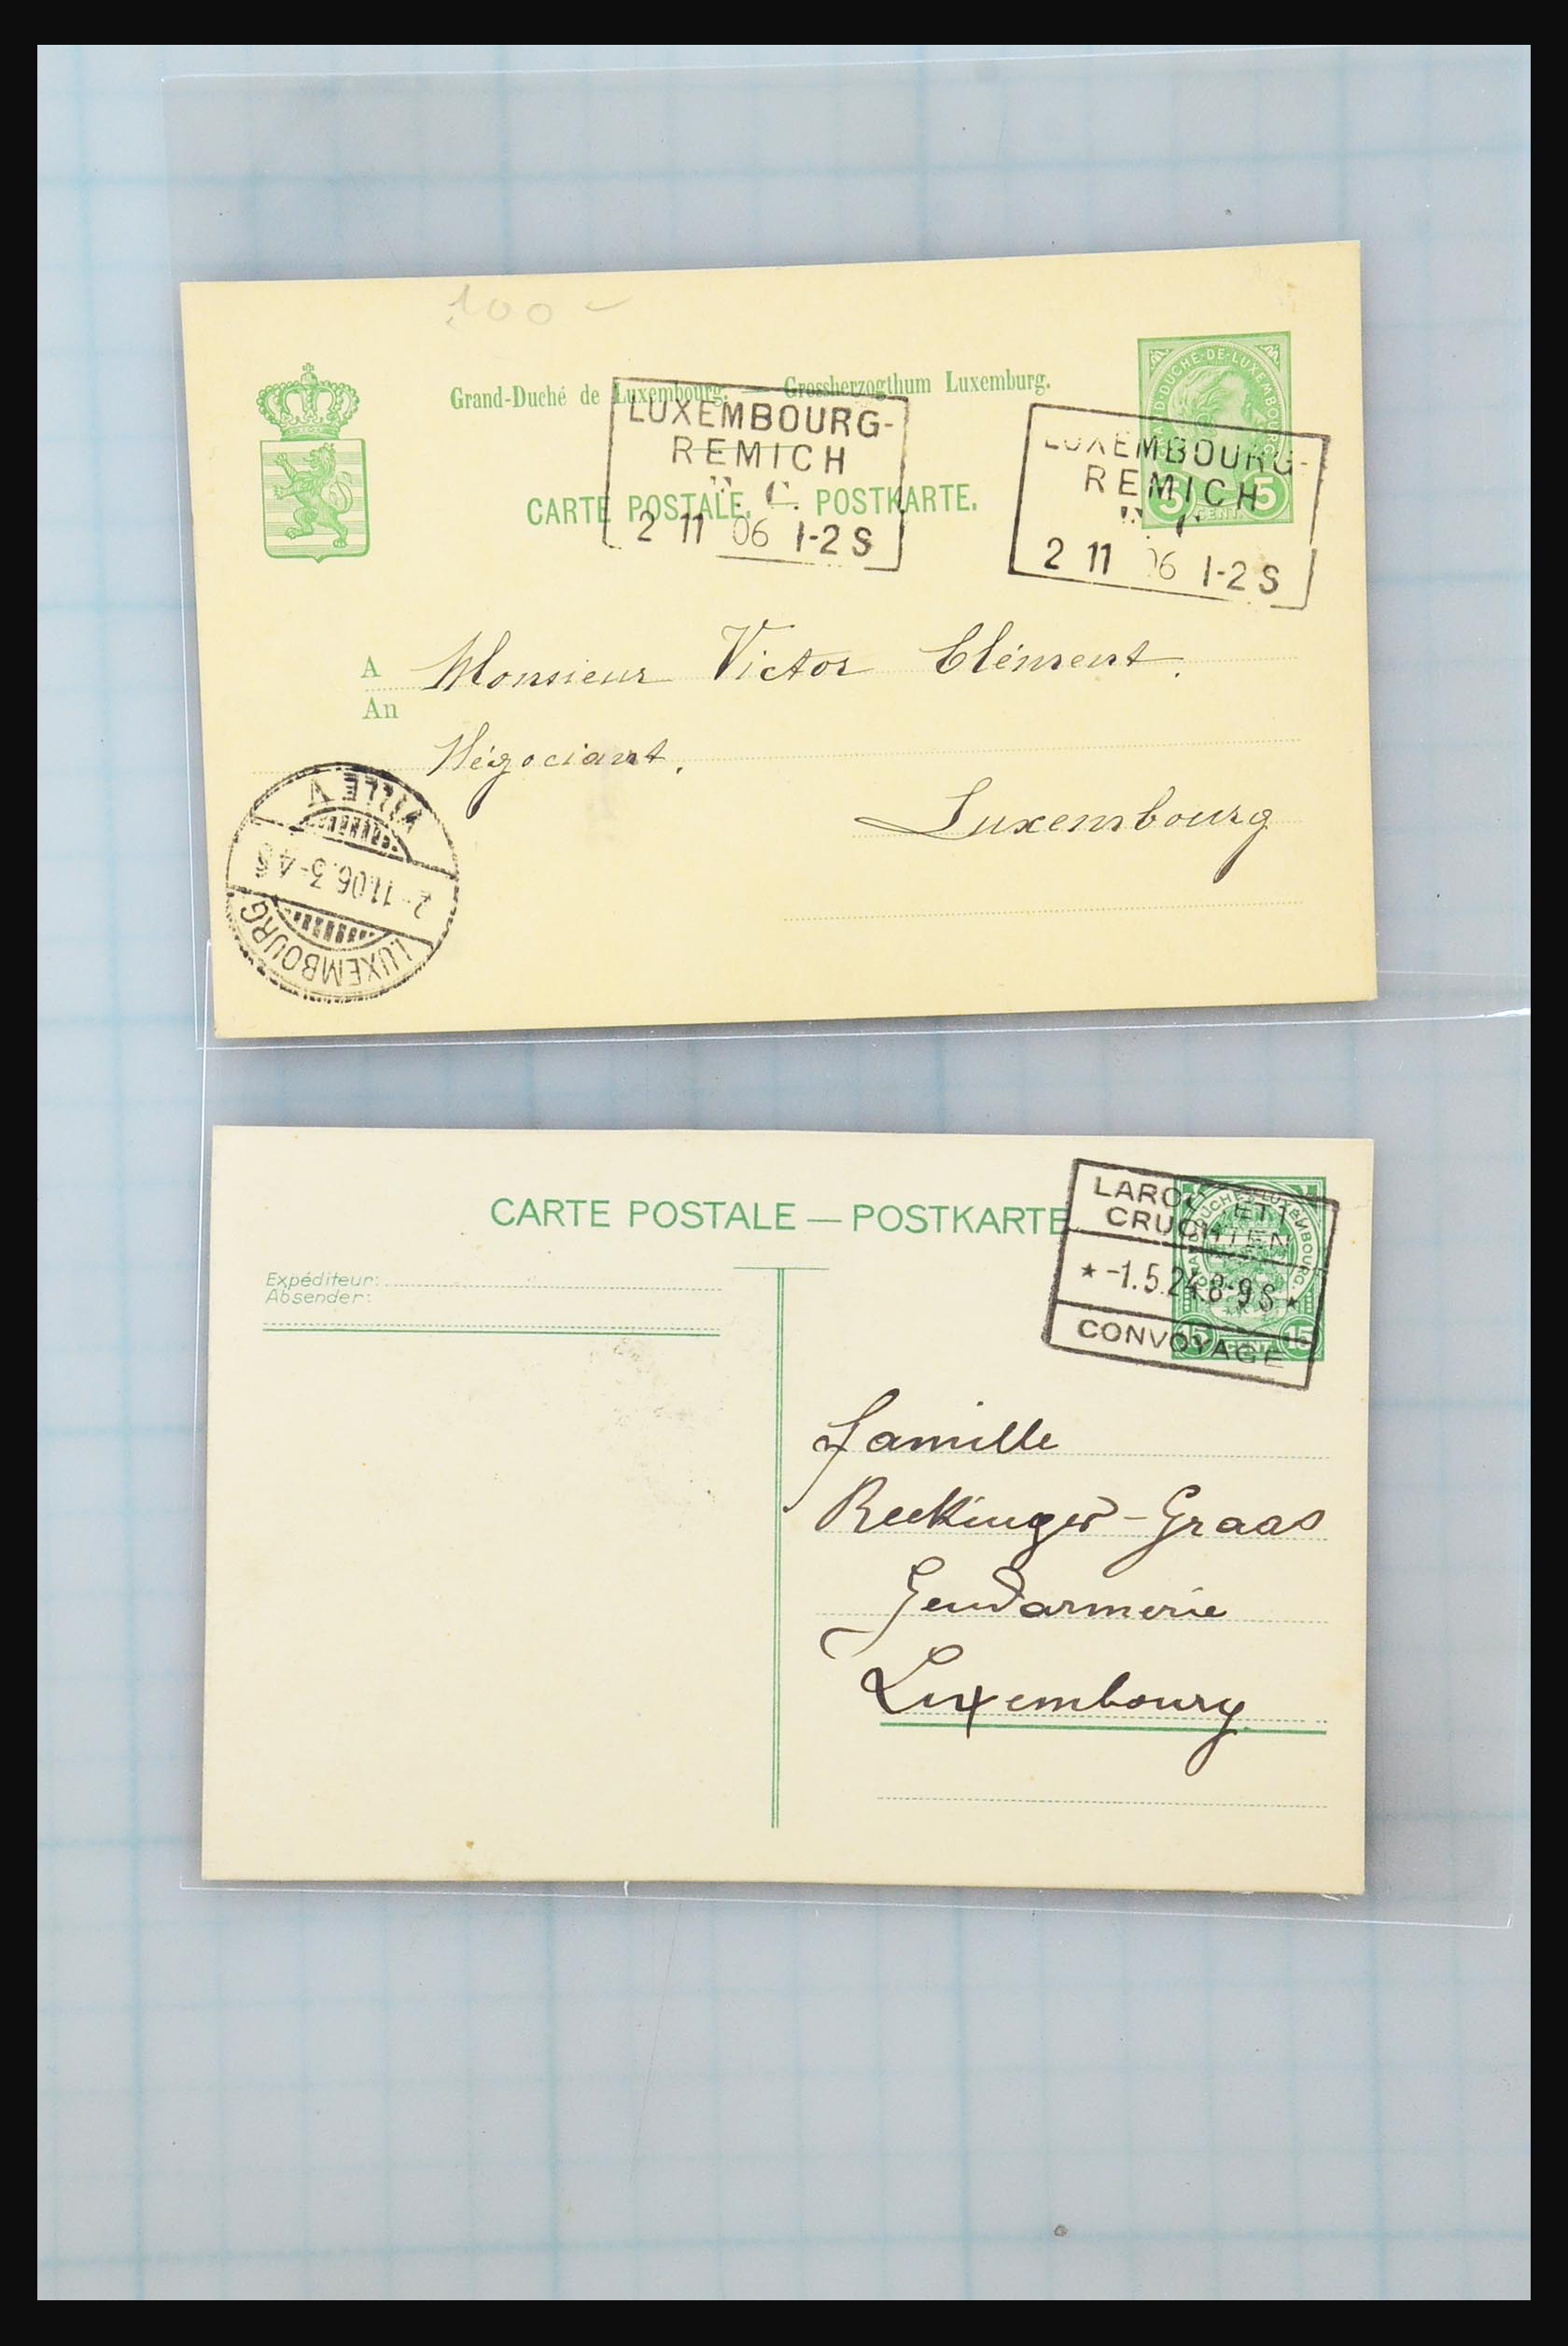 31358 053 - 31358 Portugal/Luxemburg/Greece covers 1880-1960.